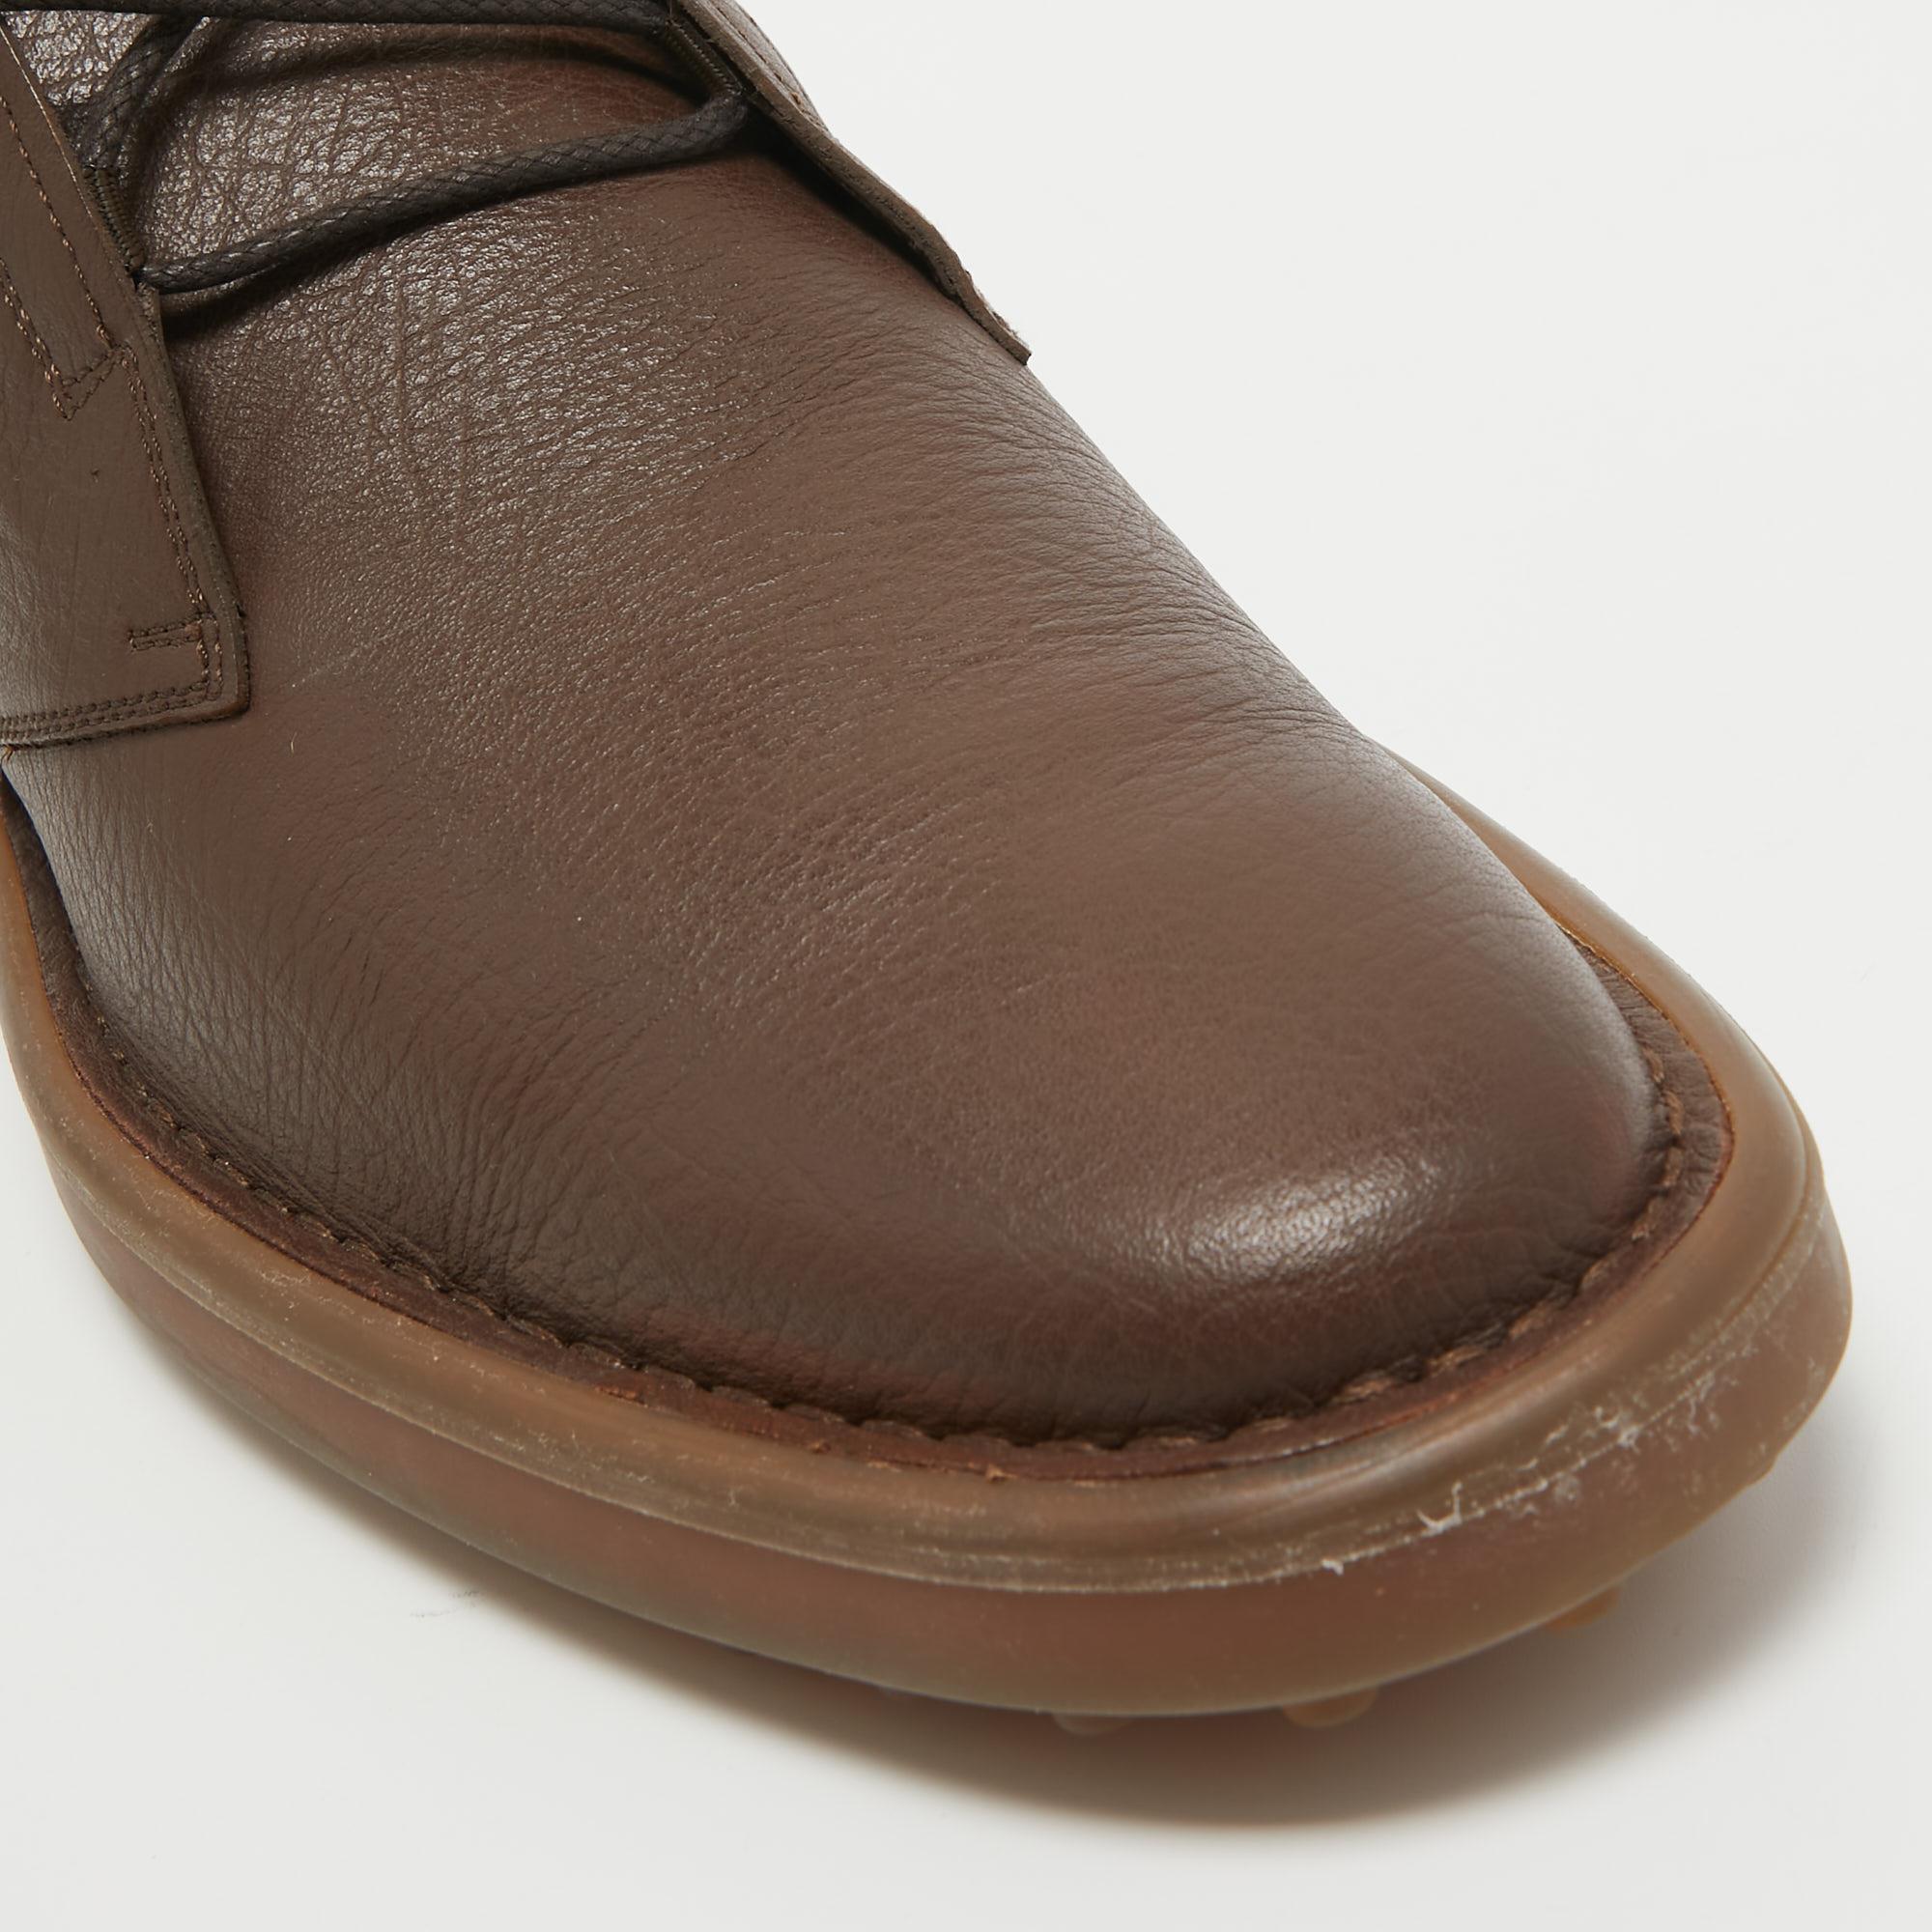 Tod's Dark Brown Leather Chukka Boots Size 45.5 In Excellent Condition For Sale In Dubai, Al Qouz 2